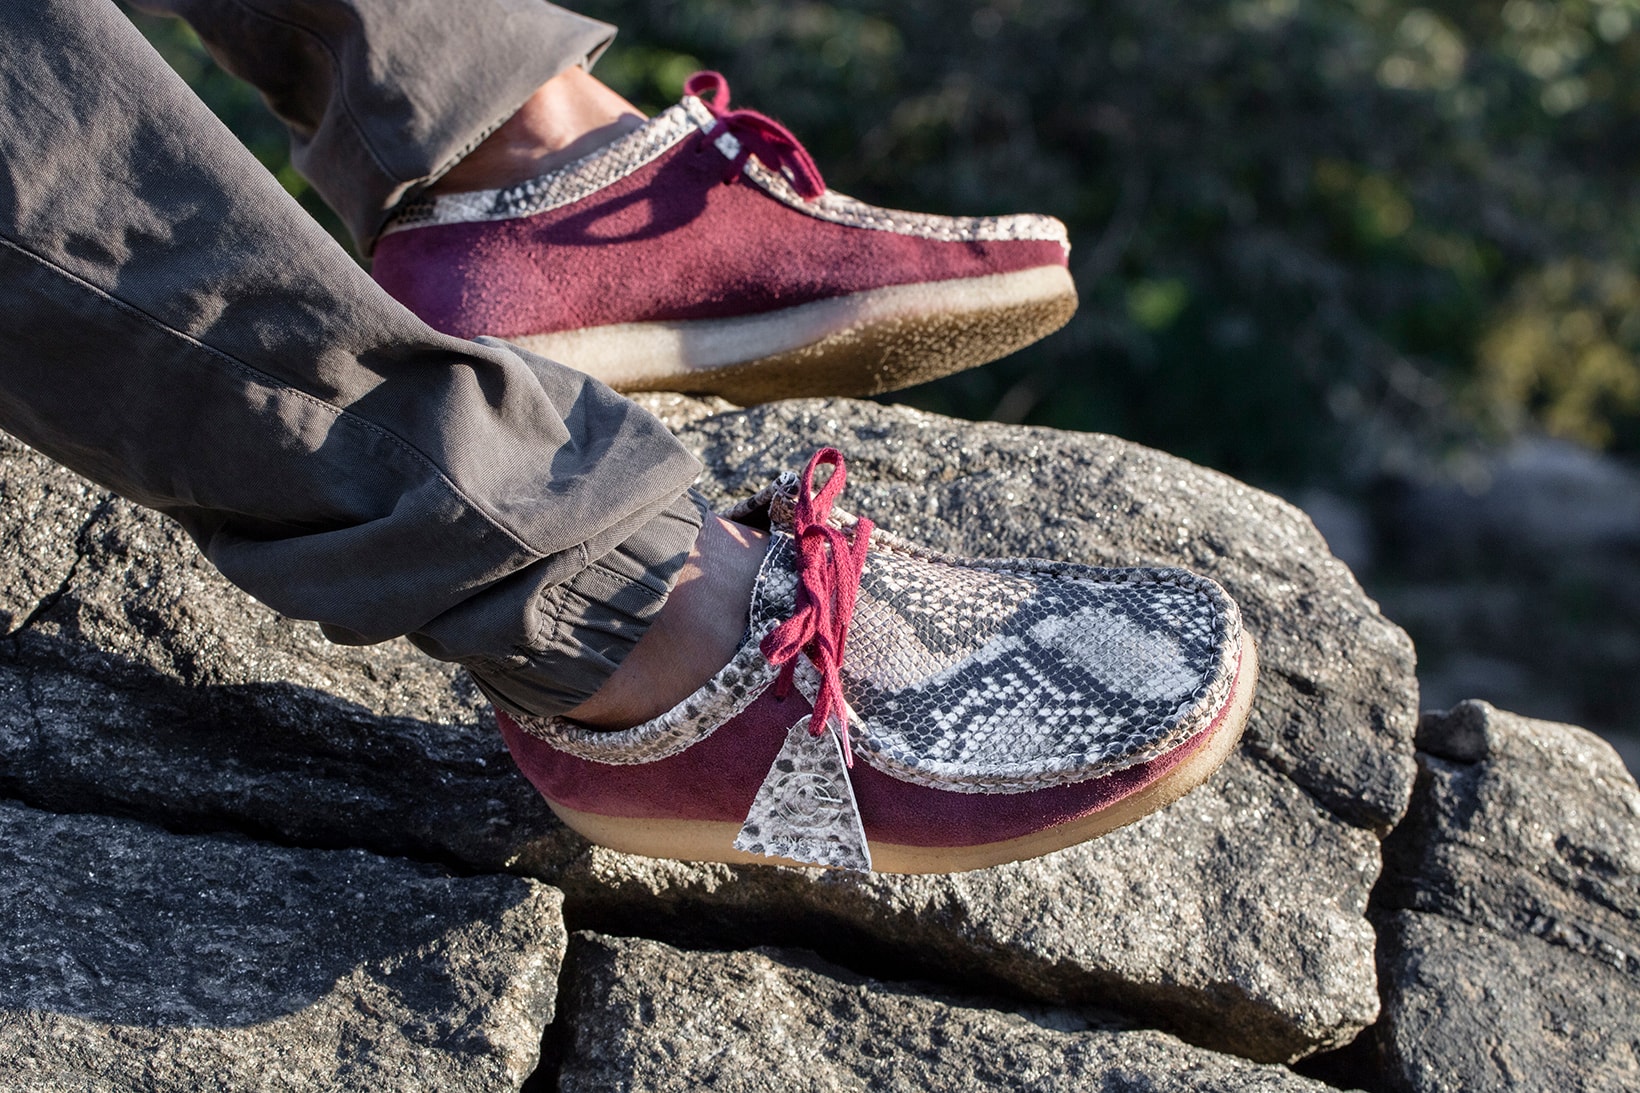 Concepts Clarks Wallabee Moc Snakeskin Burgundy Suede